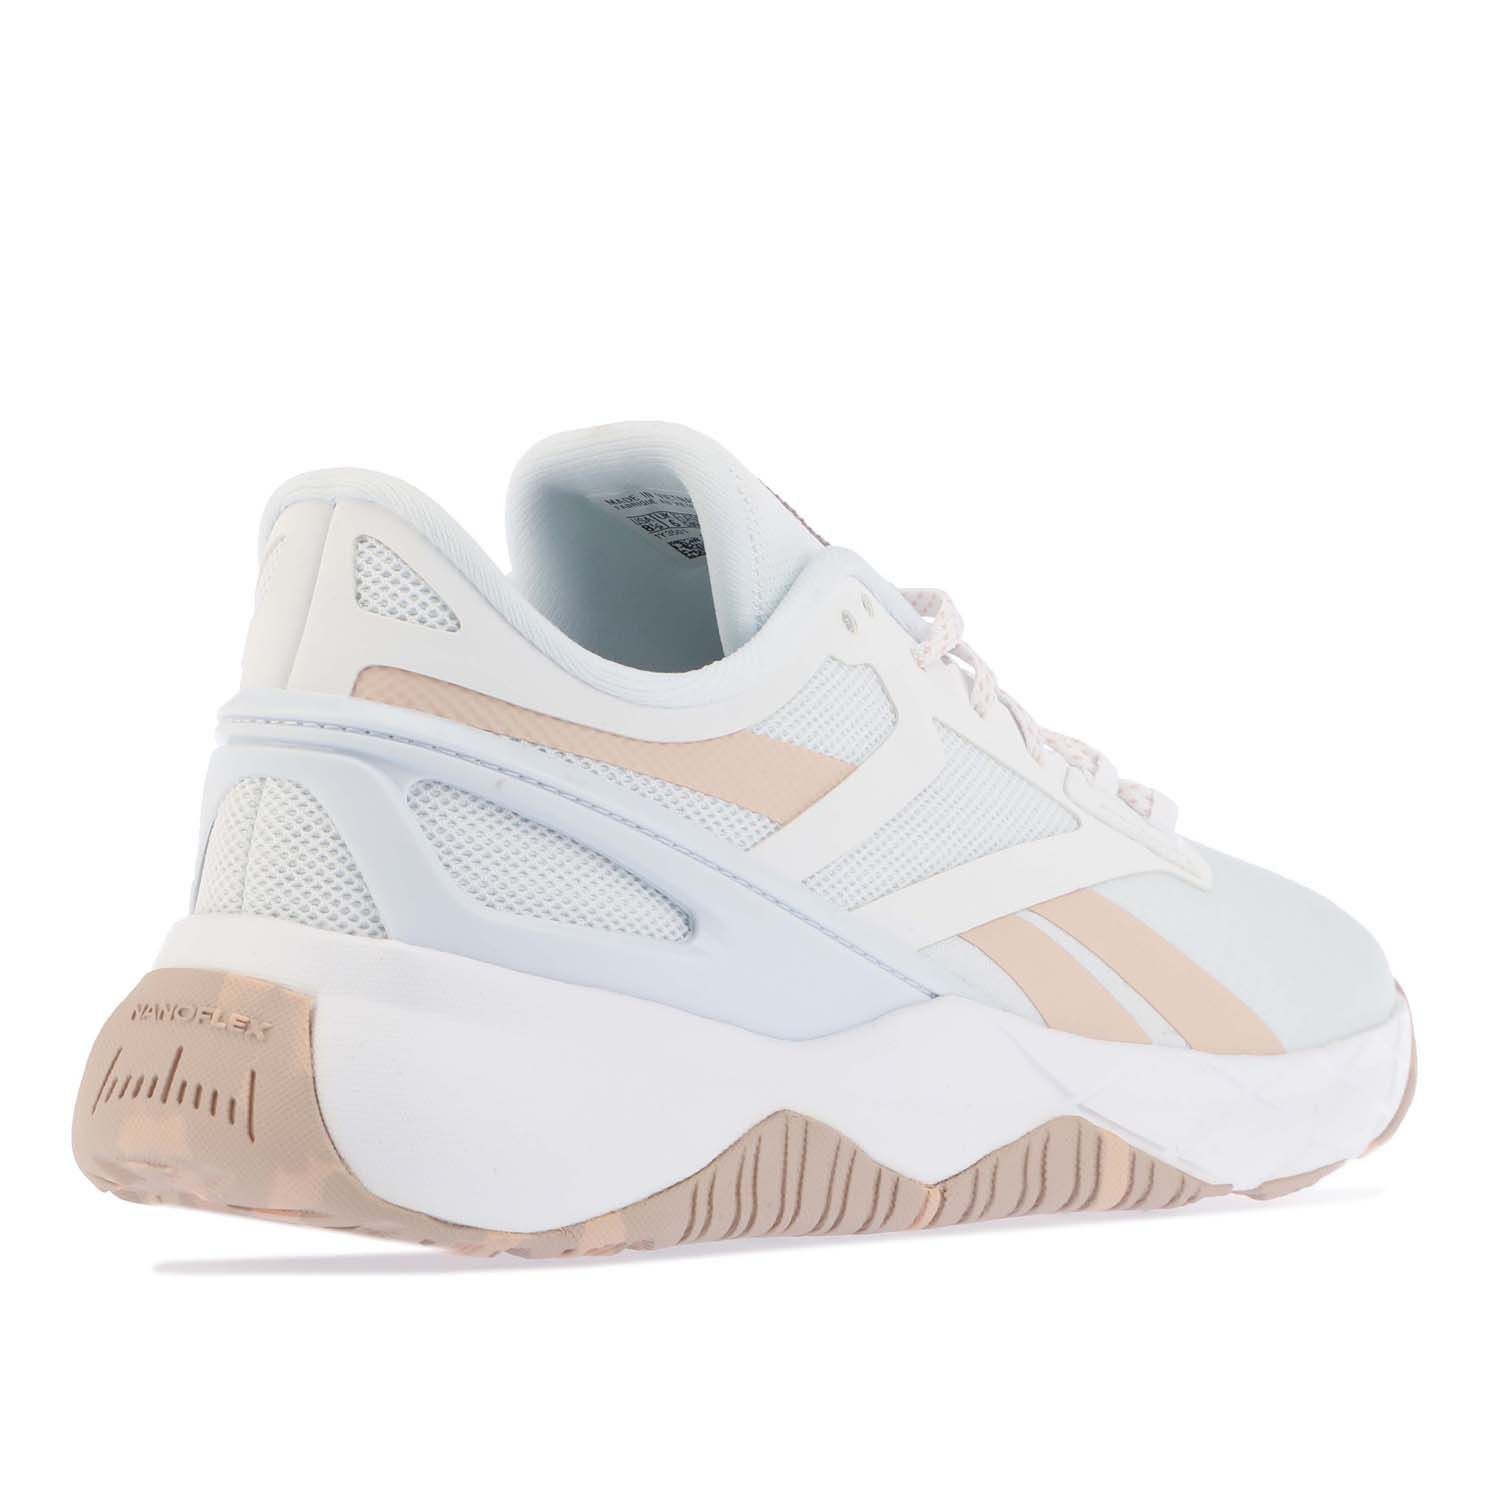 Womens Reebok Nanoflex Trainers in white.- Mesh upper.- Lace closure.- Regular fit.- Padded ankle.- Reebok branding.- Breathable feel.- TPU heel clip for stability.- High-traction rubber outsole.- Ref: GX7551